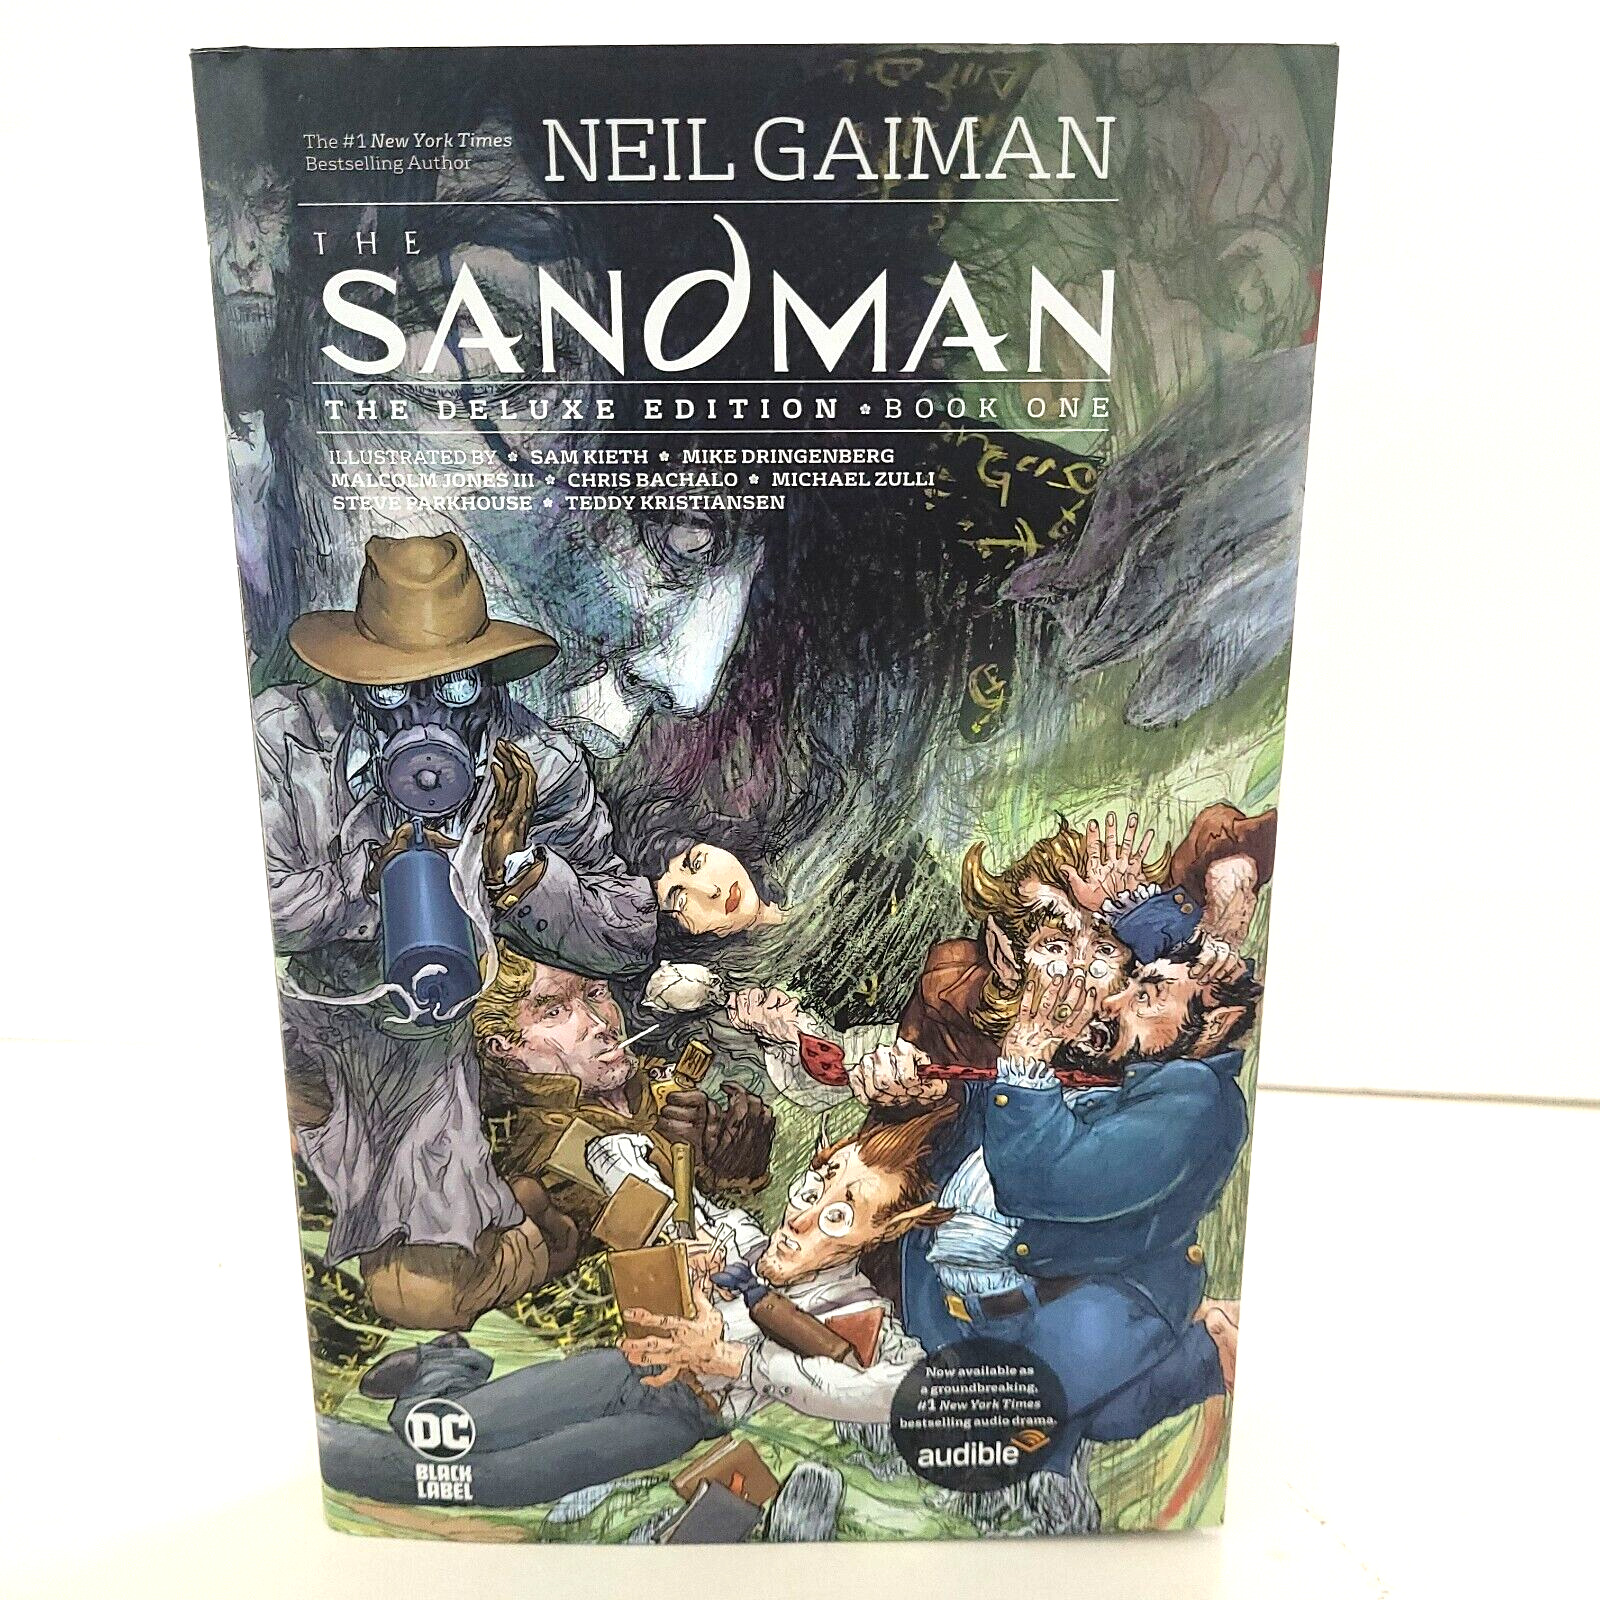 The Sandman: The Deluxe Edition Book One (DC Black Label, 2020) Hard Cover Book